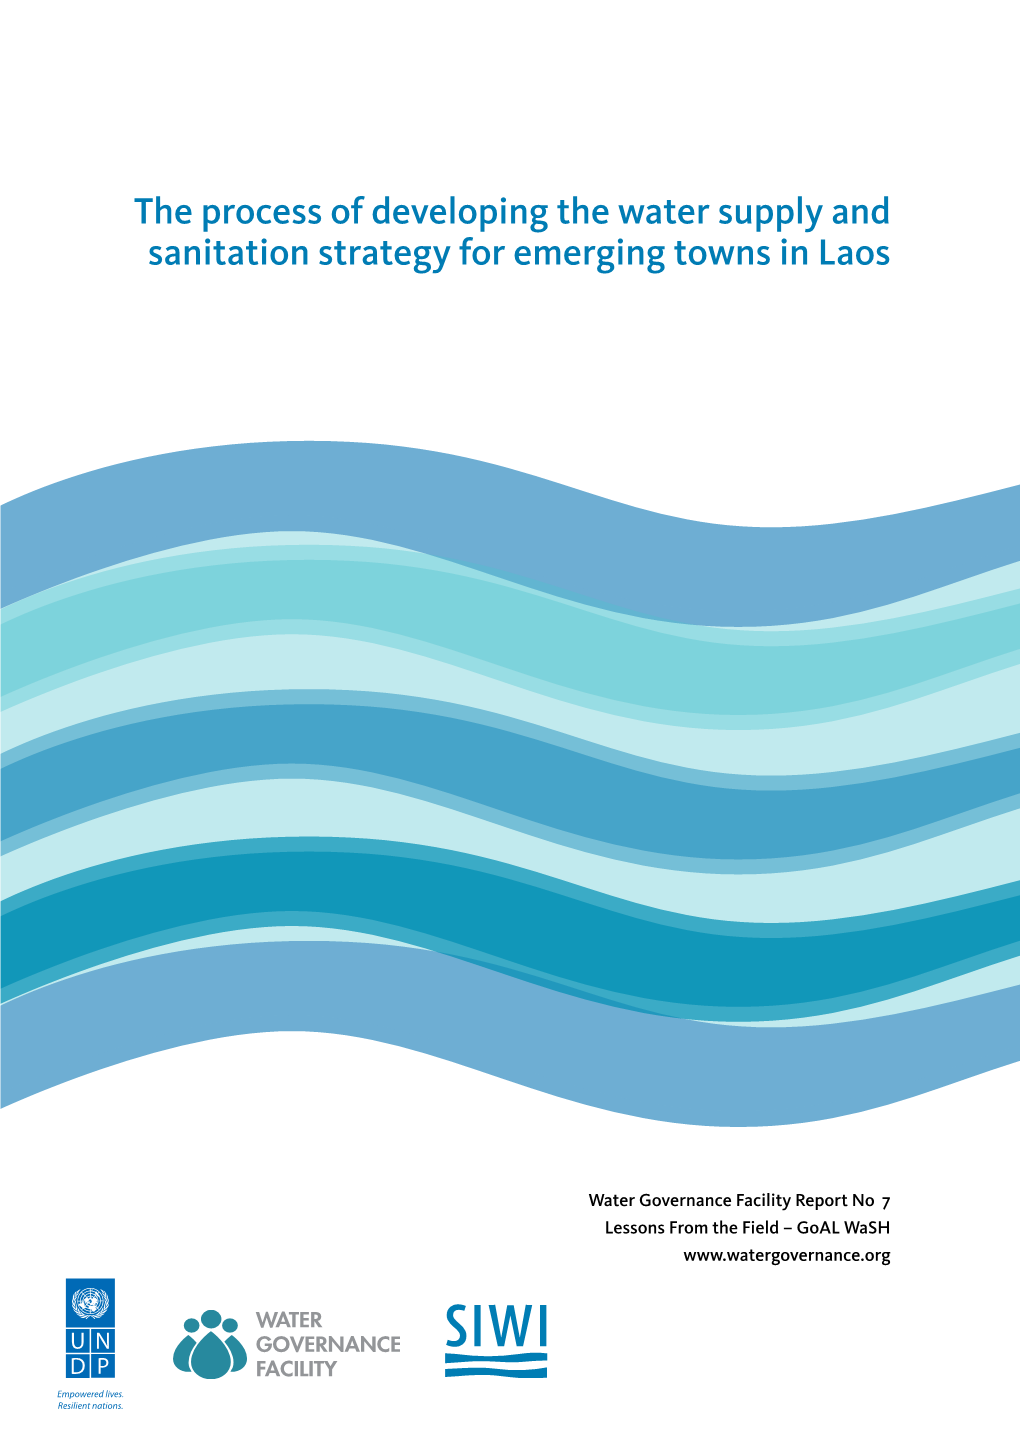 The Process of Developing the Water Supply and Sanitation Strategy for Emerging Towns in Laos